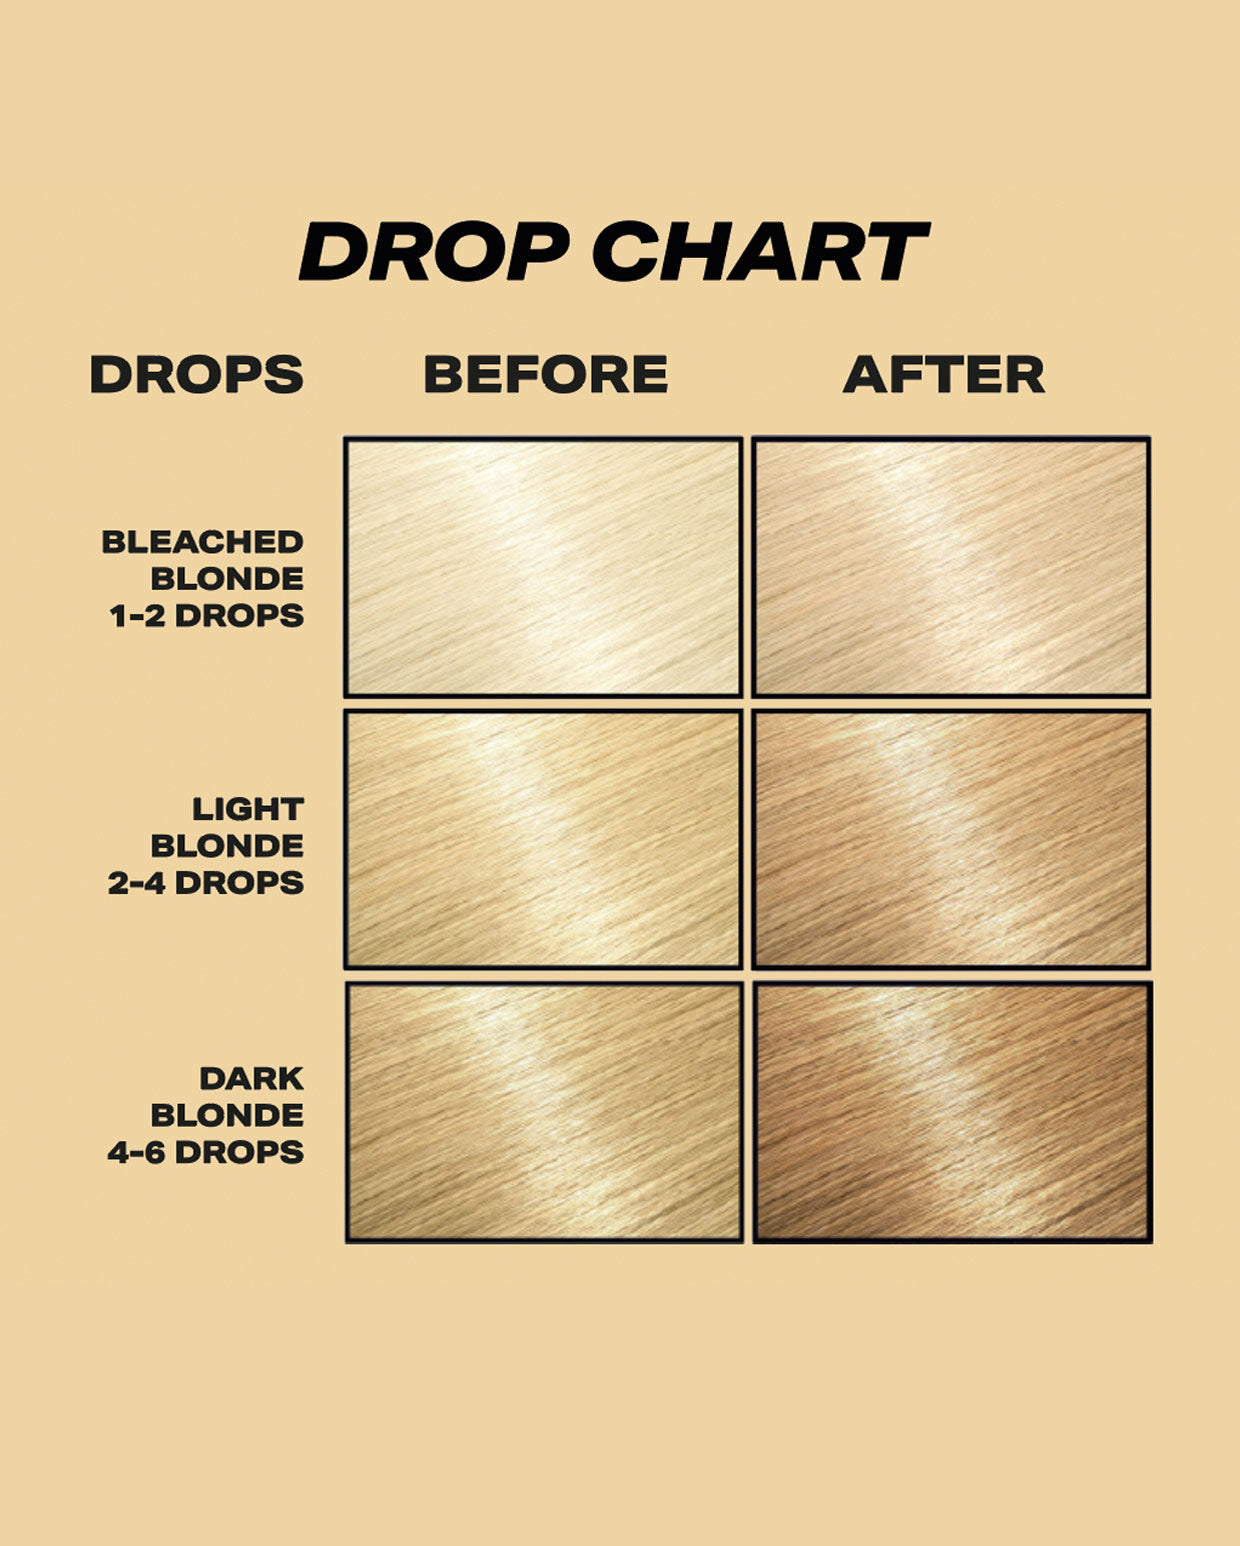 DROP IT CARAMEL BEFORE AND AFTER CHART 